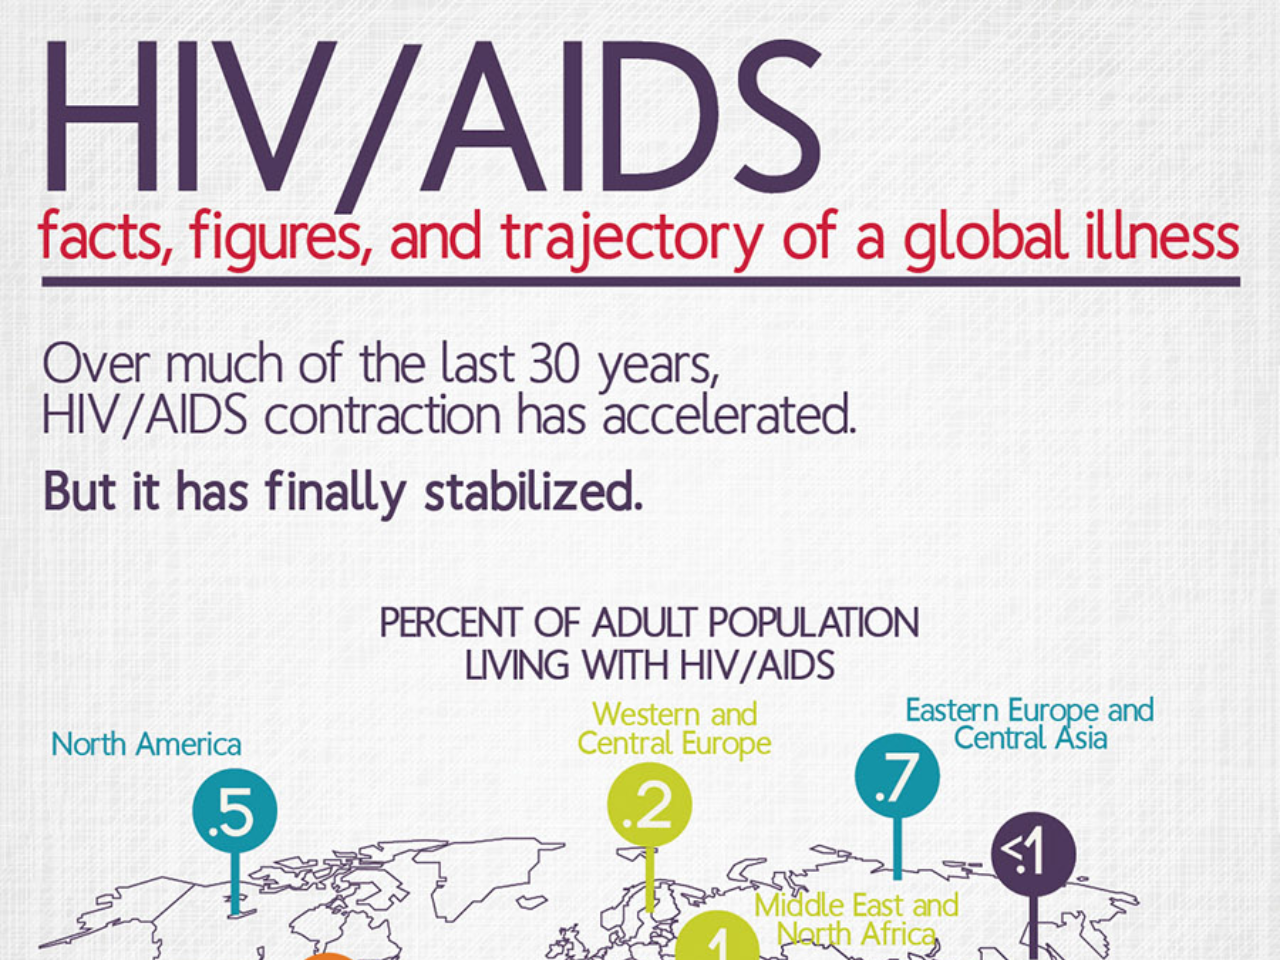 AIDS TODAY: THE FACTS, FIGURES, AND TRAJECTORY OF A GLOBAL ILLNESS